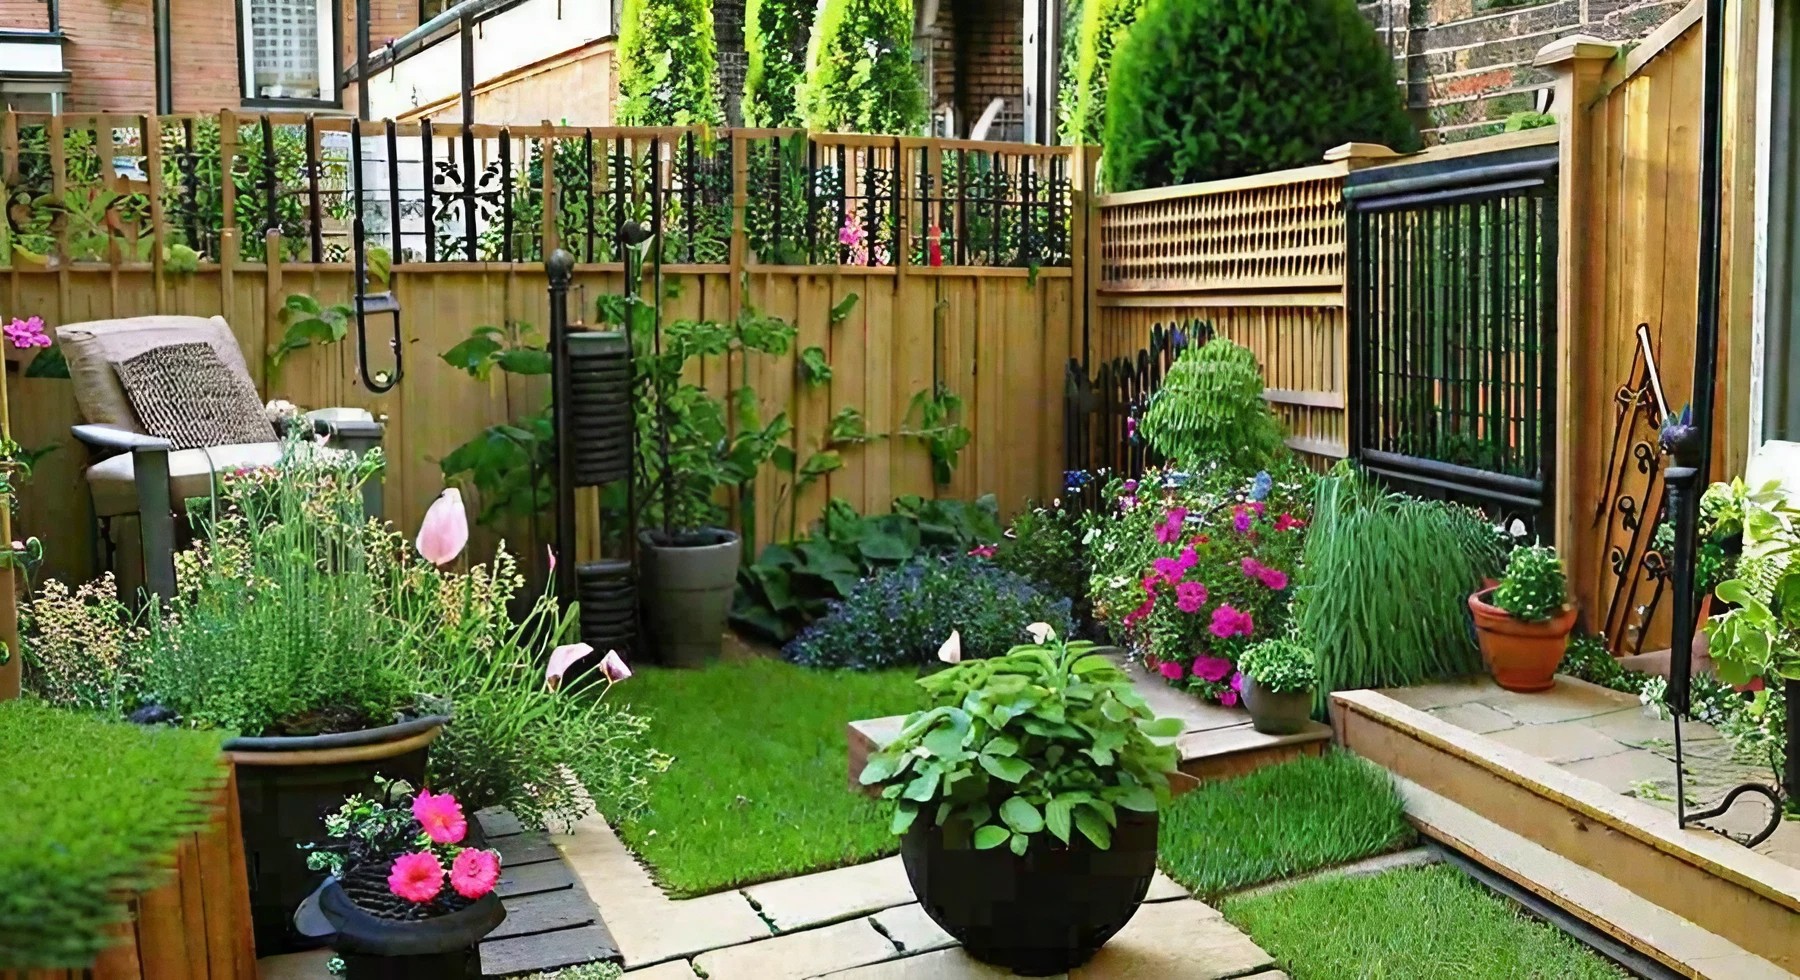 A small backyard with potted plants and a wooden fence, perfect for summer projects.